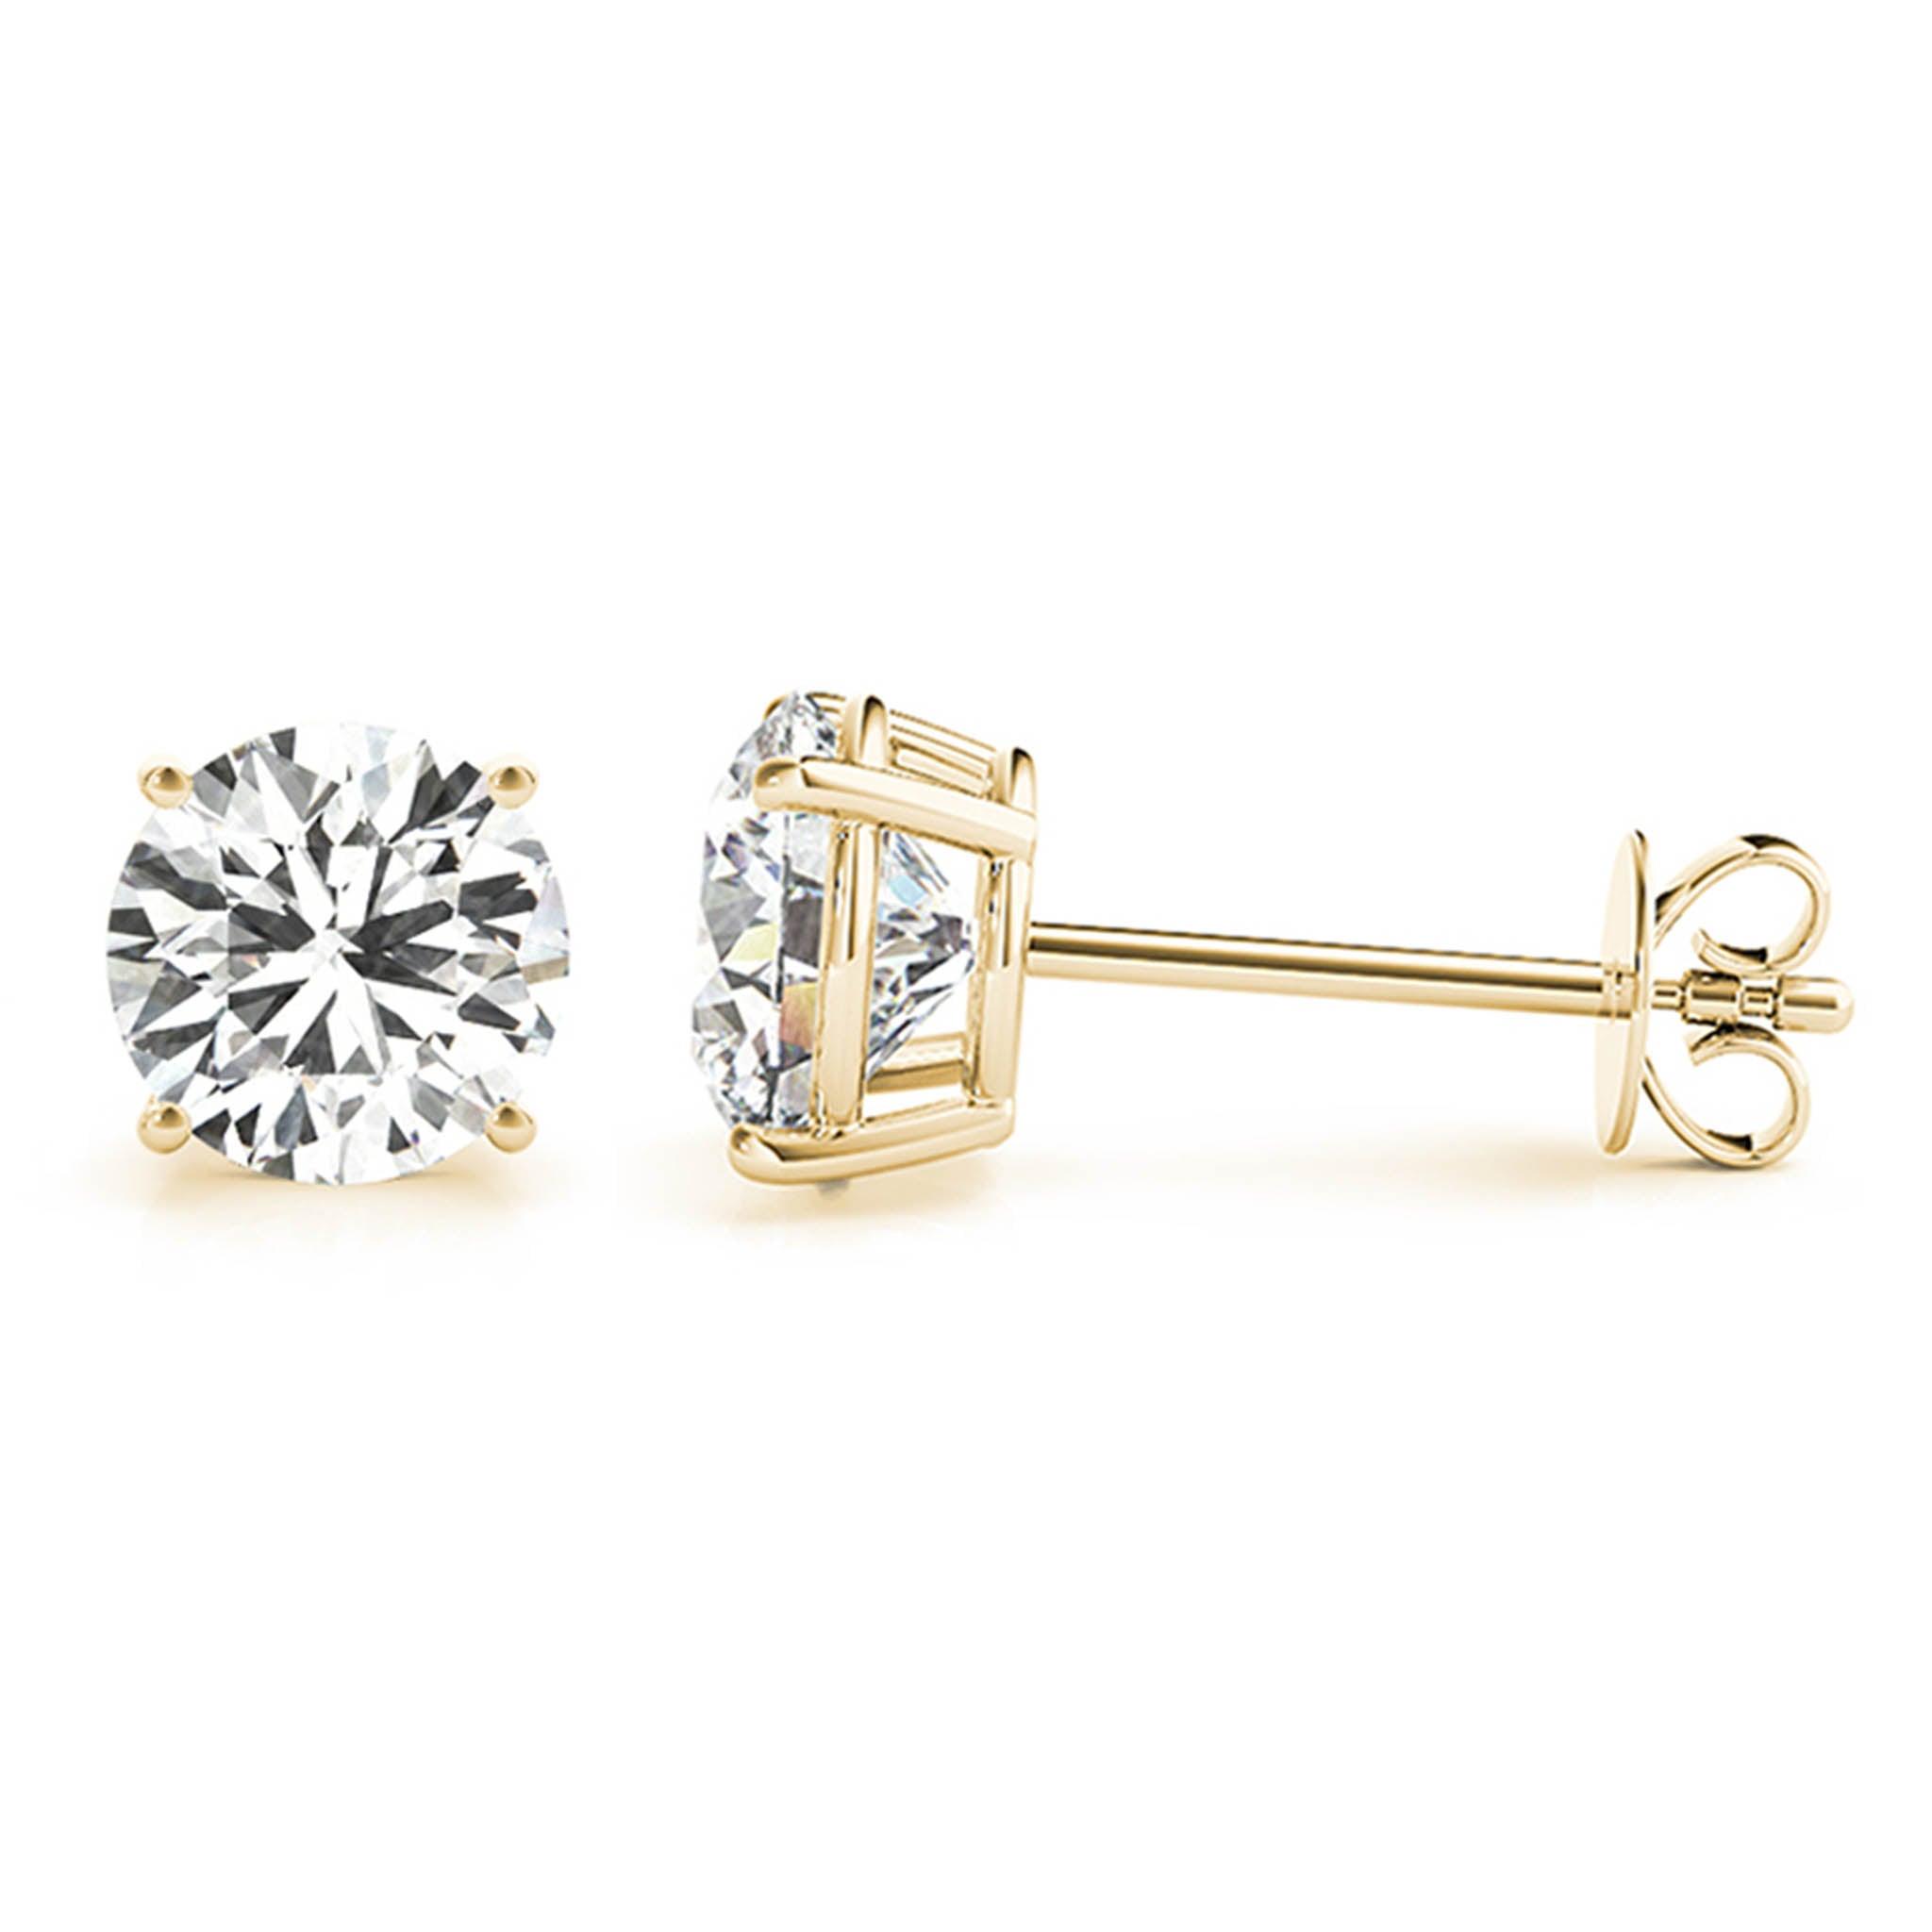 Zoey Lab Grown Diamond Ear Studs / Earrings in gold. Total diamond weight 0.50 carats / half carat. 4 claw setting. 14ct yellow gold version.